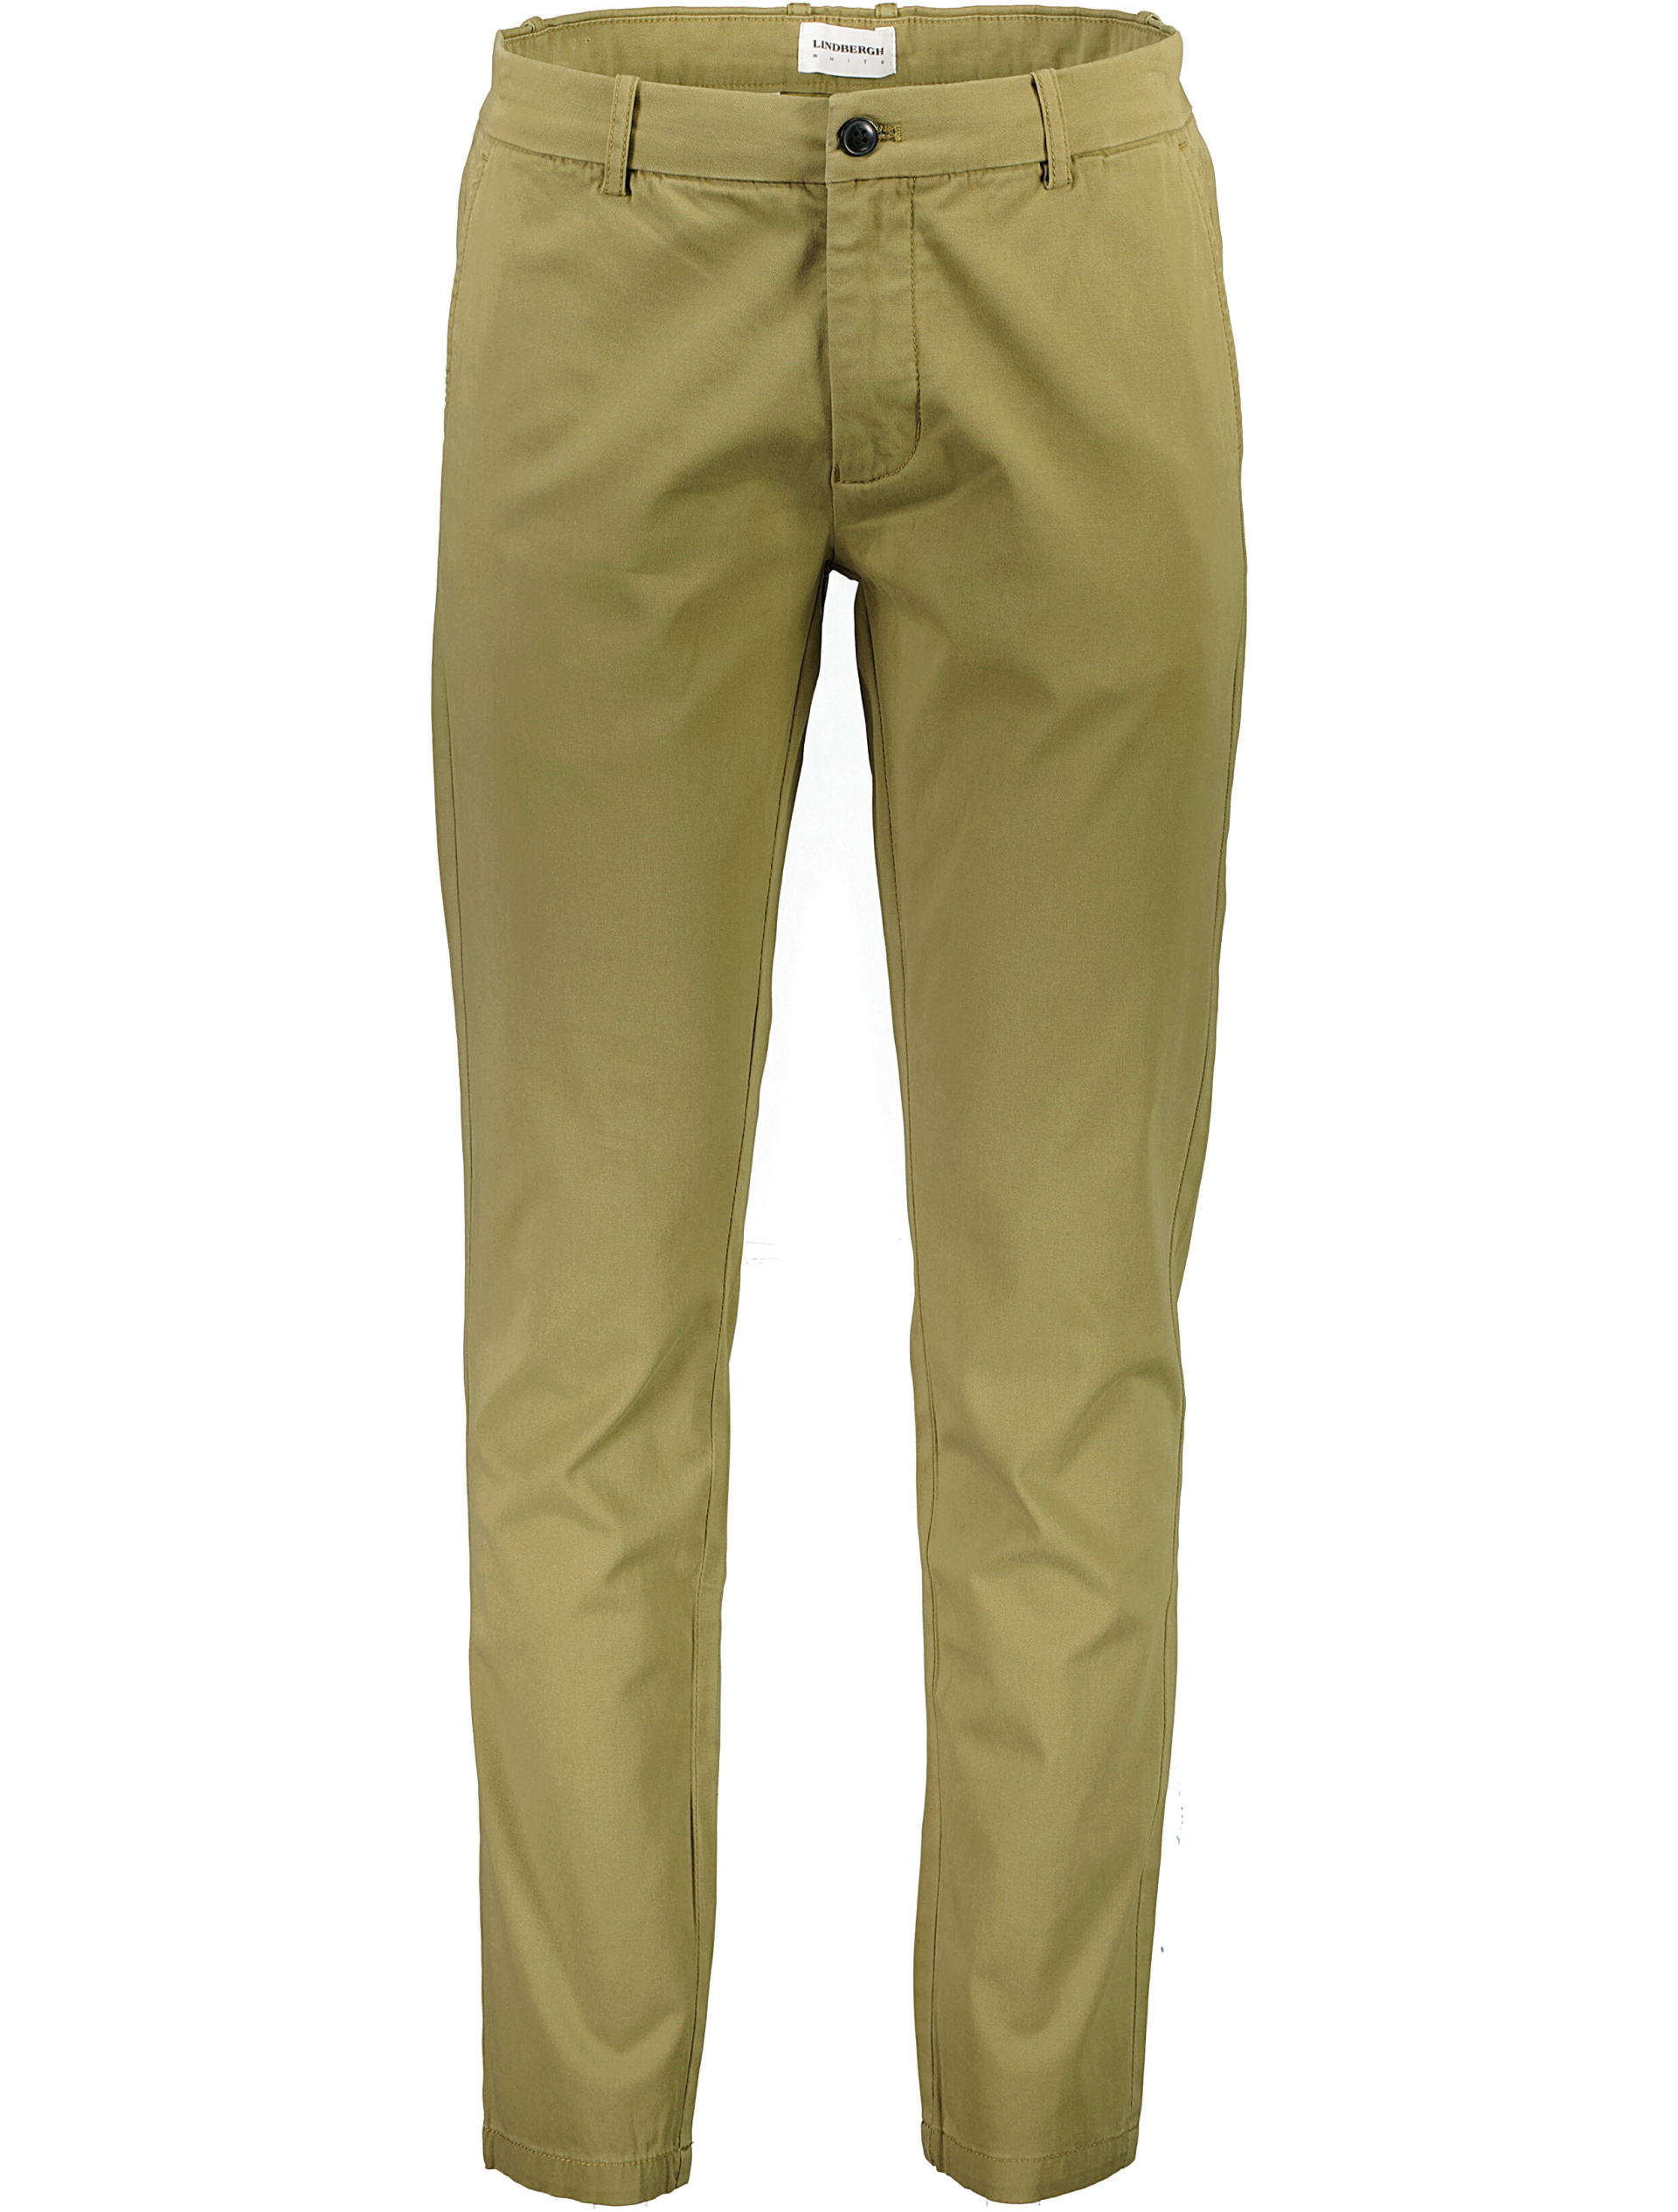 Lindbergh Chinos green / dusty olive